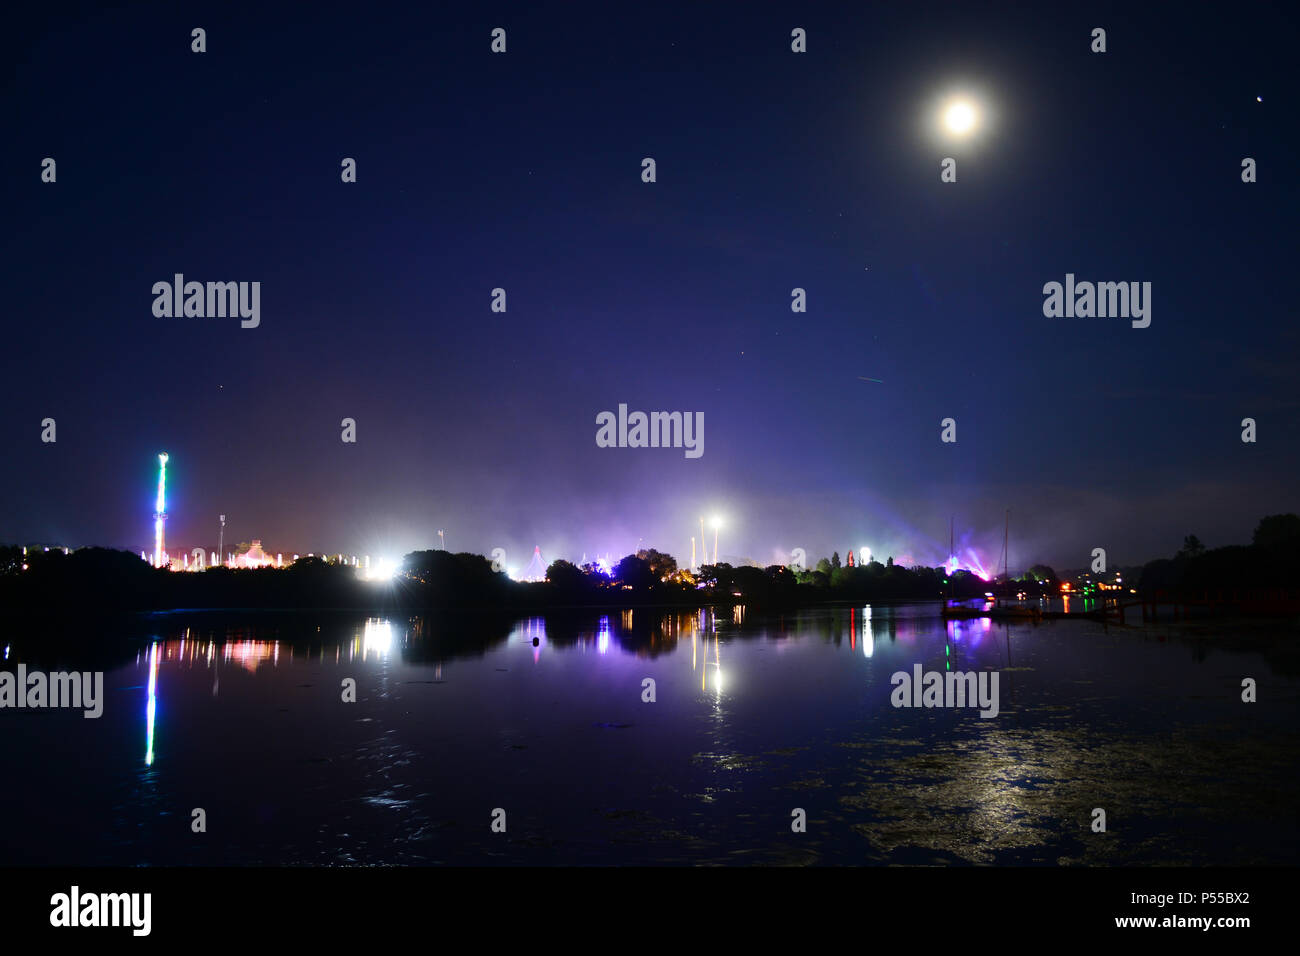 Newport, Isle of Wight, UK. 24th June, 2018. Fireworks and a near full moon herald the end of the last day of the Isle of Wight Festival as the Sunday night headliner band 'The Killers' play on the main stage, seen in the distance in blue lights. Photograph taken from the banks of the River Medina in Newport, Isle of Wight, June 24th 2018. Credit: Matthew Blythe/Alamy Live News Stock Photo